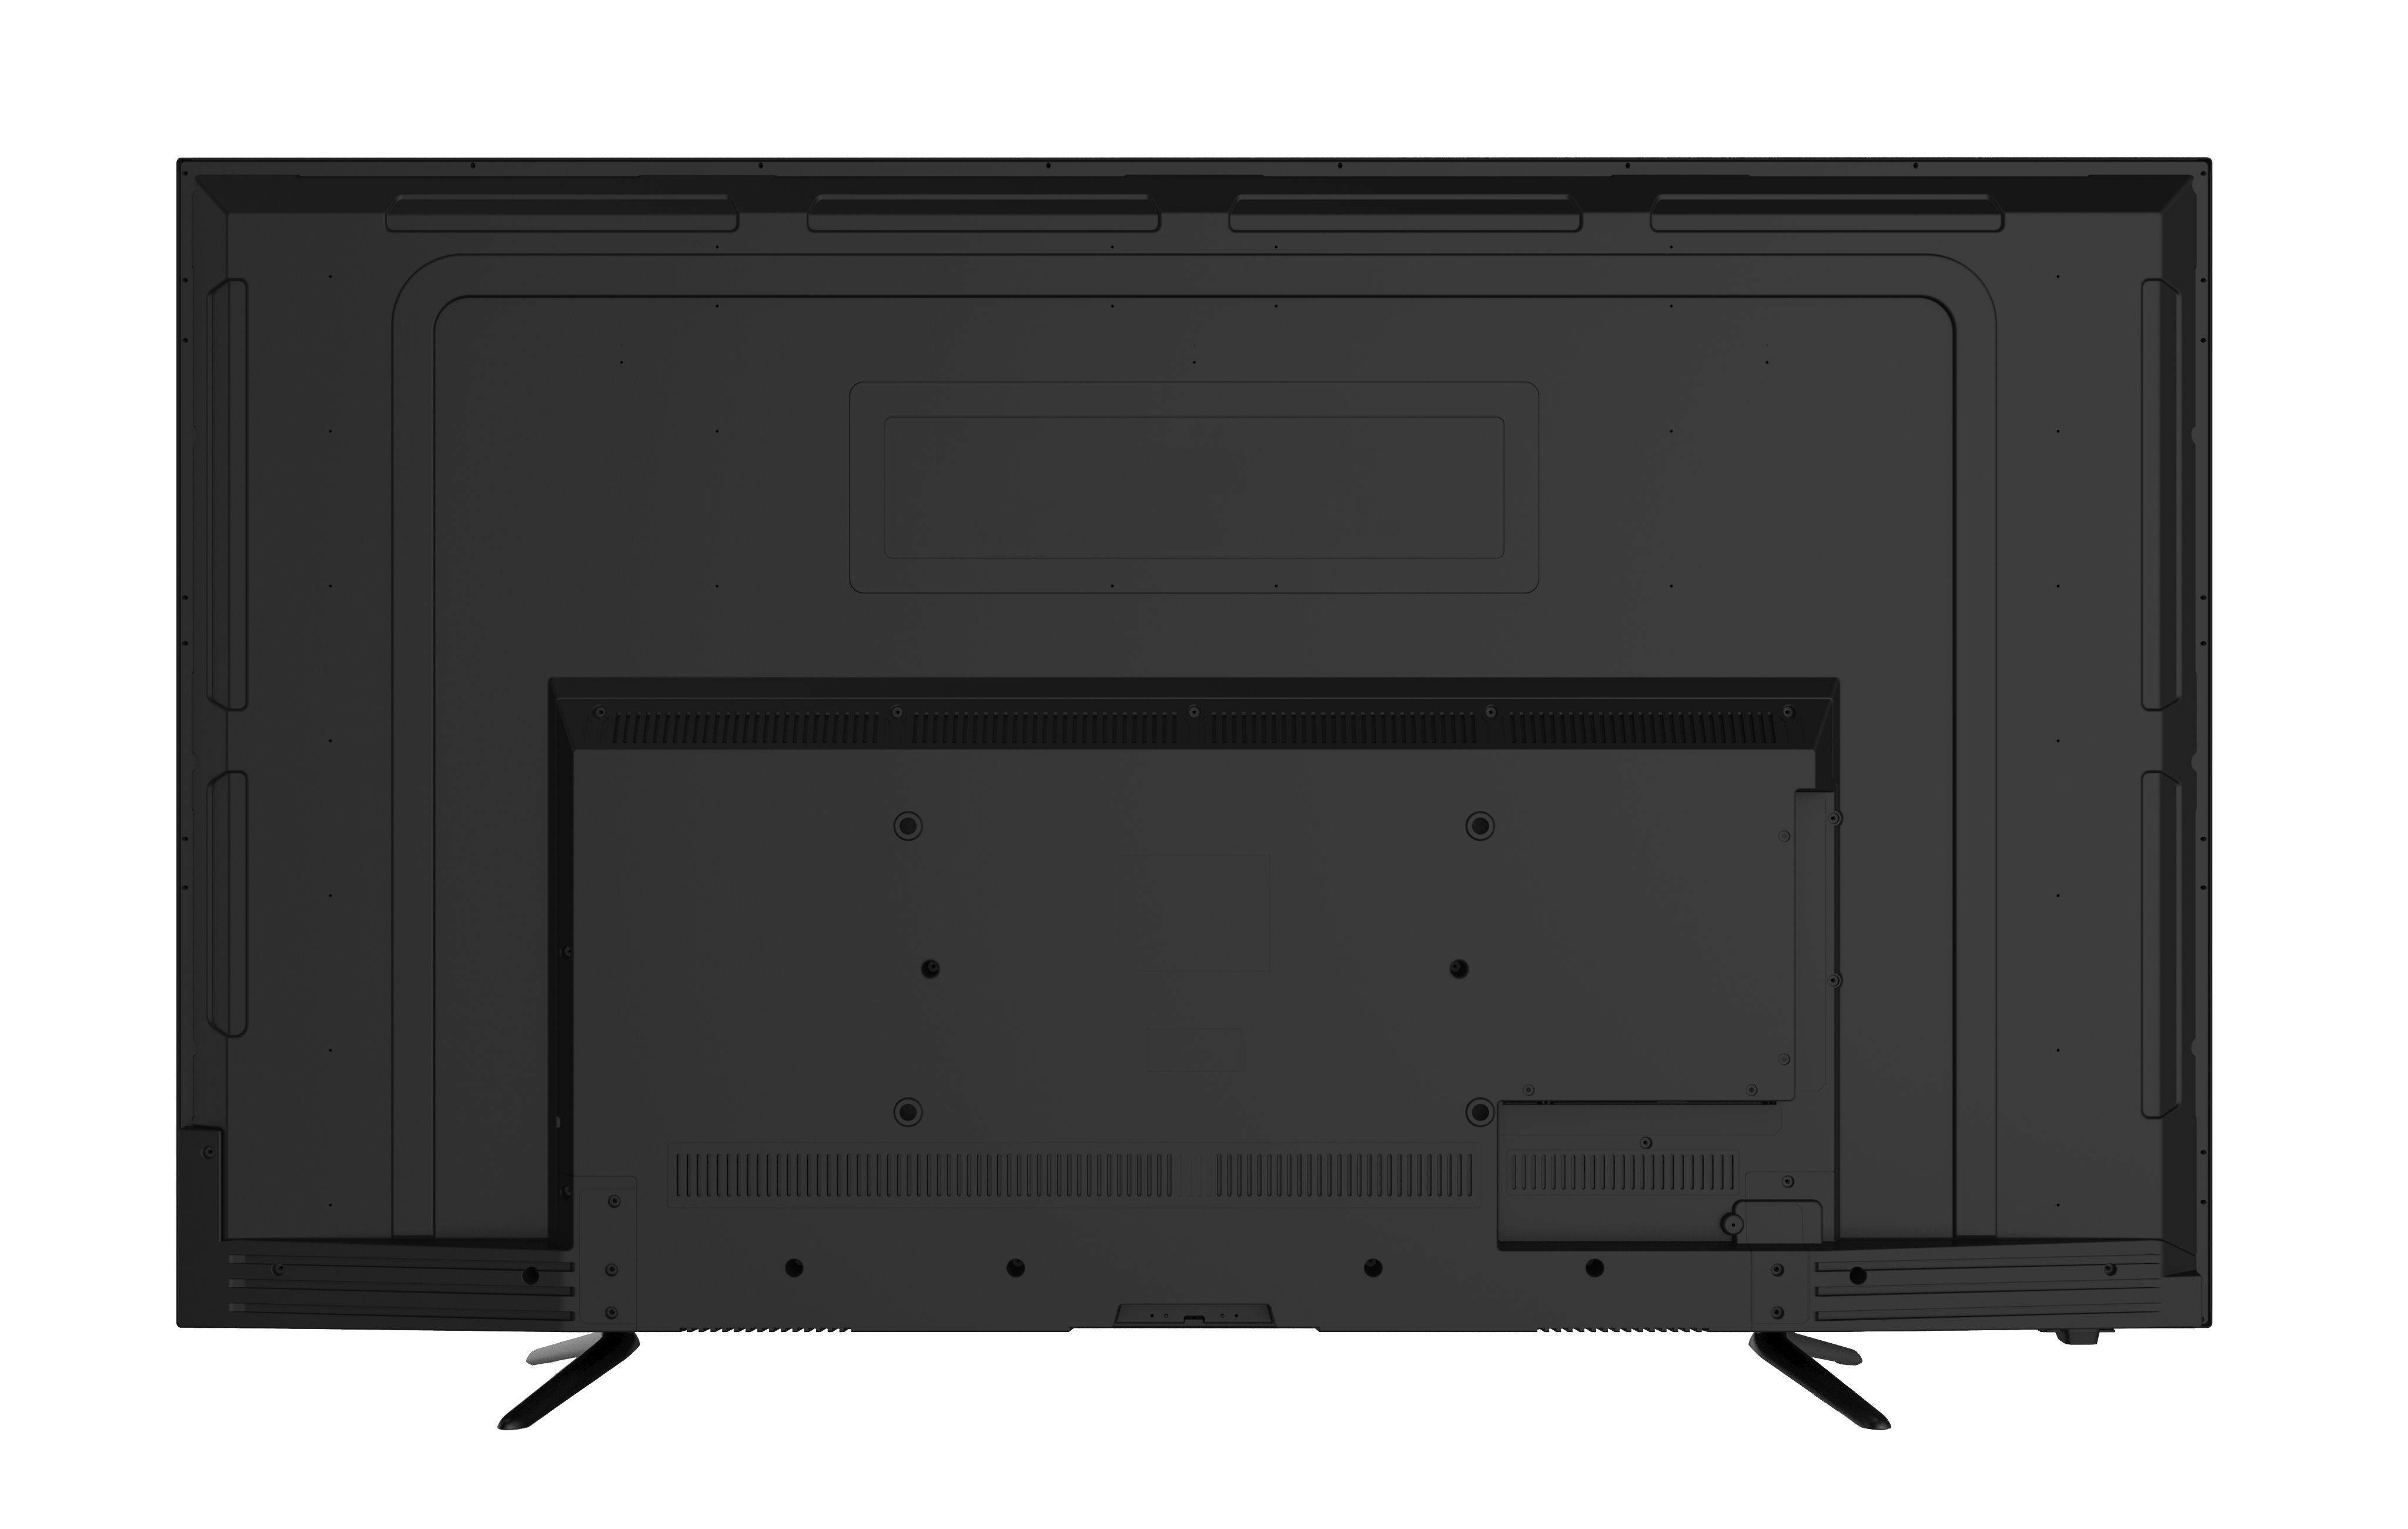 ATYME 65" Class 4K (2160P) LED TV (650AM7UD) - image 5 of 18